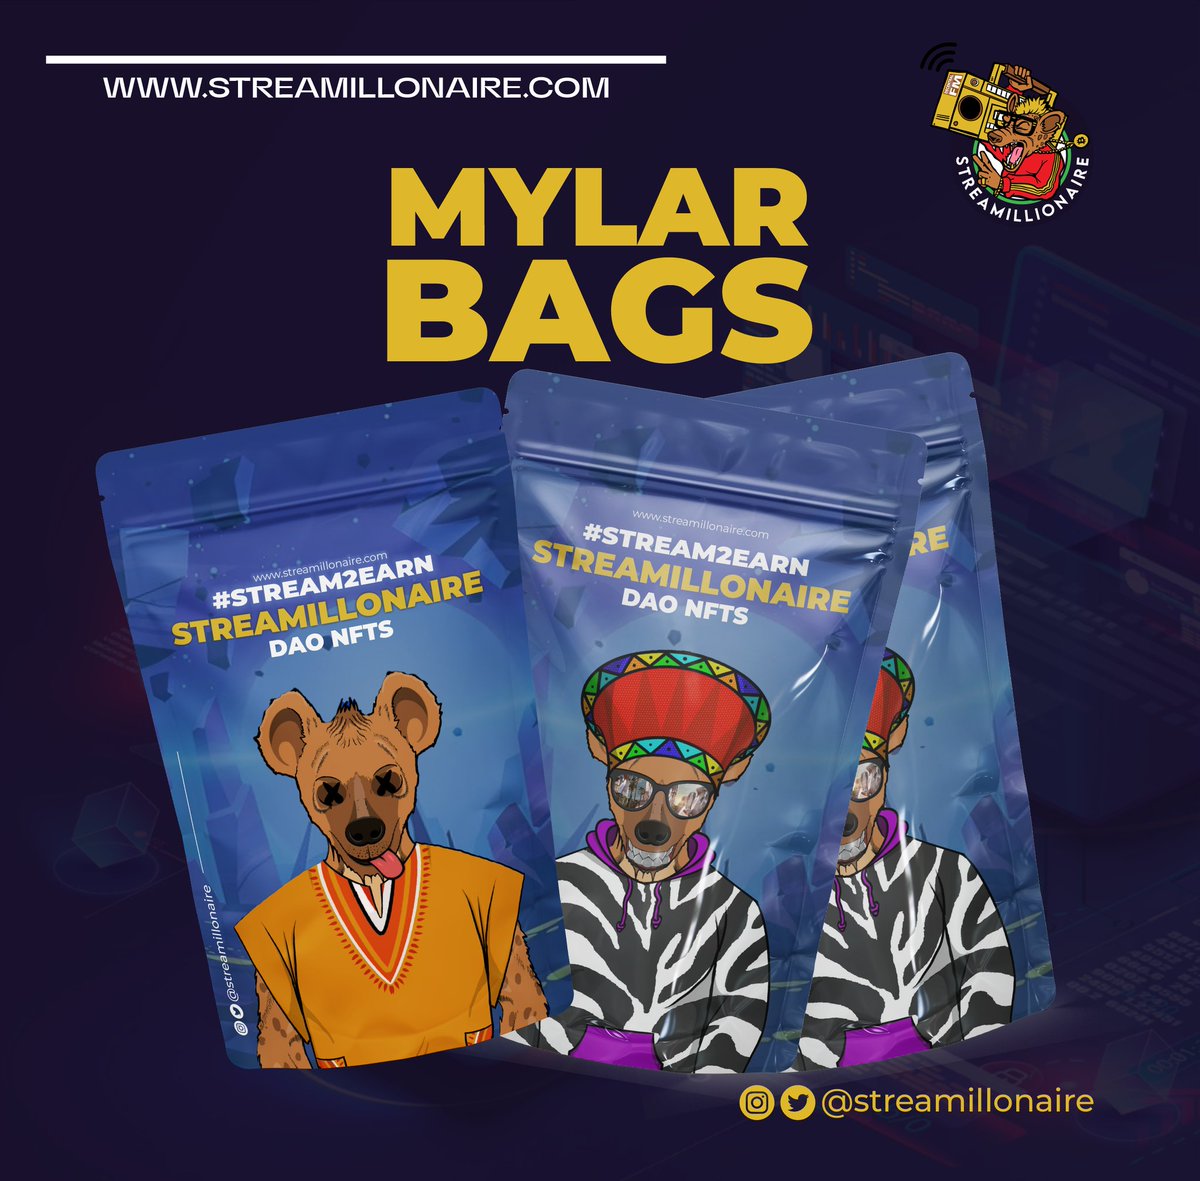 Shop our stylish and durable Mylar bags by visiting the website on our bio.

#streamillonaire #Lagoslabs #mylarbags #mylarbaglabels #nftgang #nftartwork #nftphotography #nftmarket #nftmylarbags